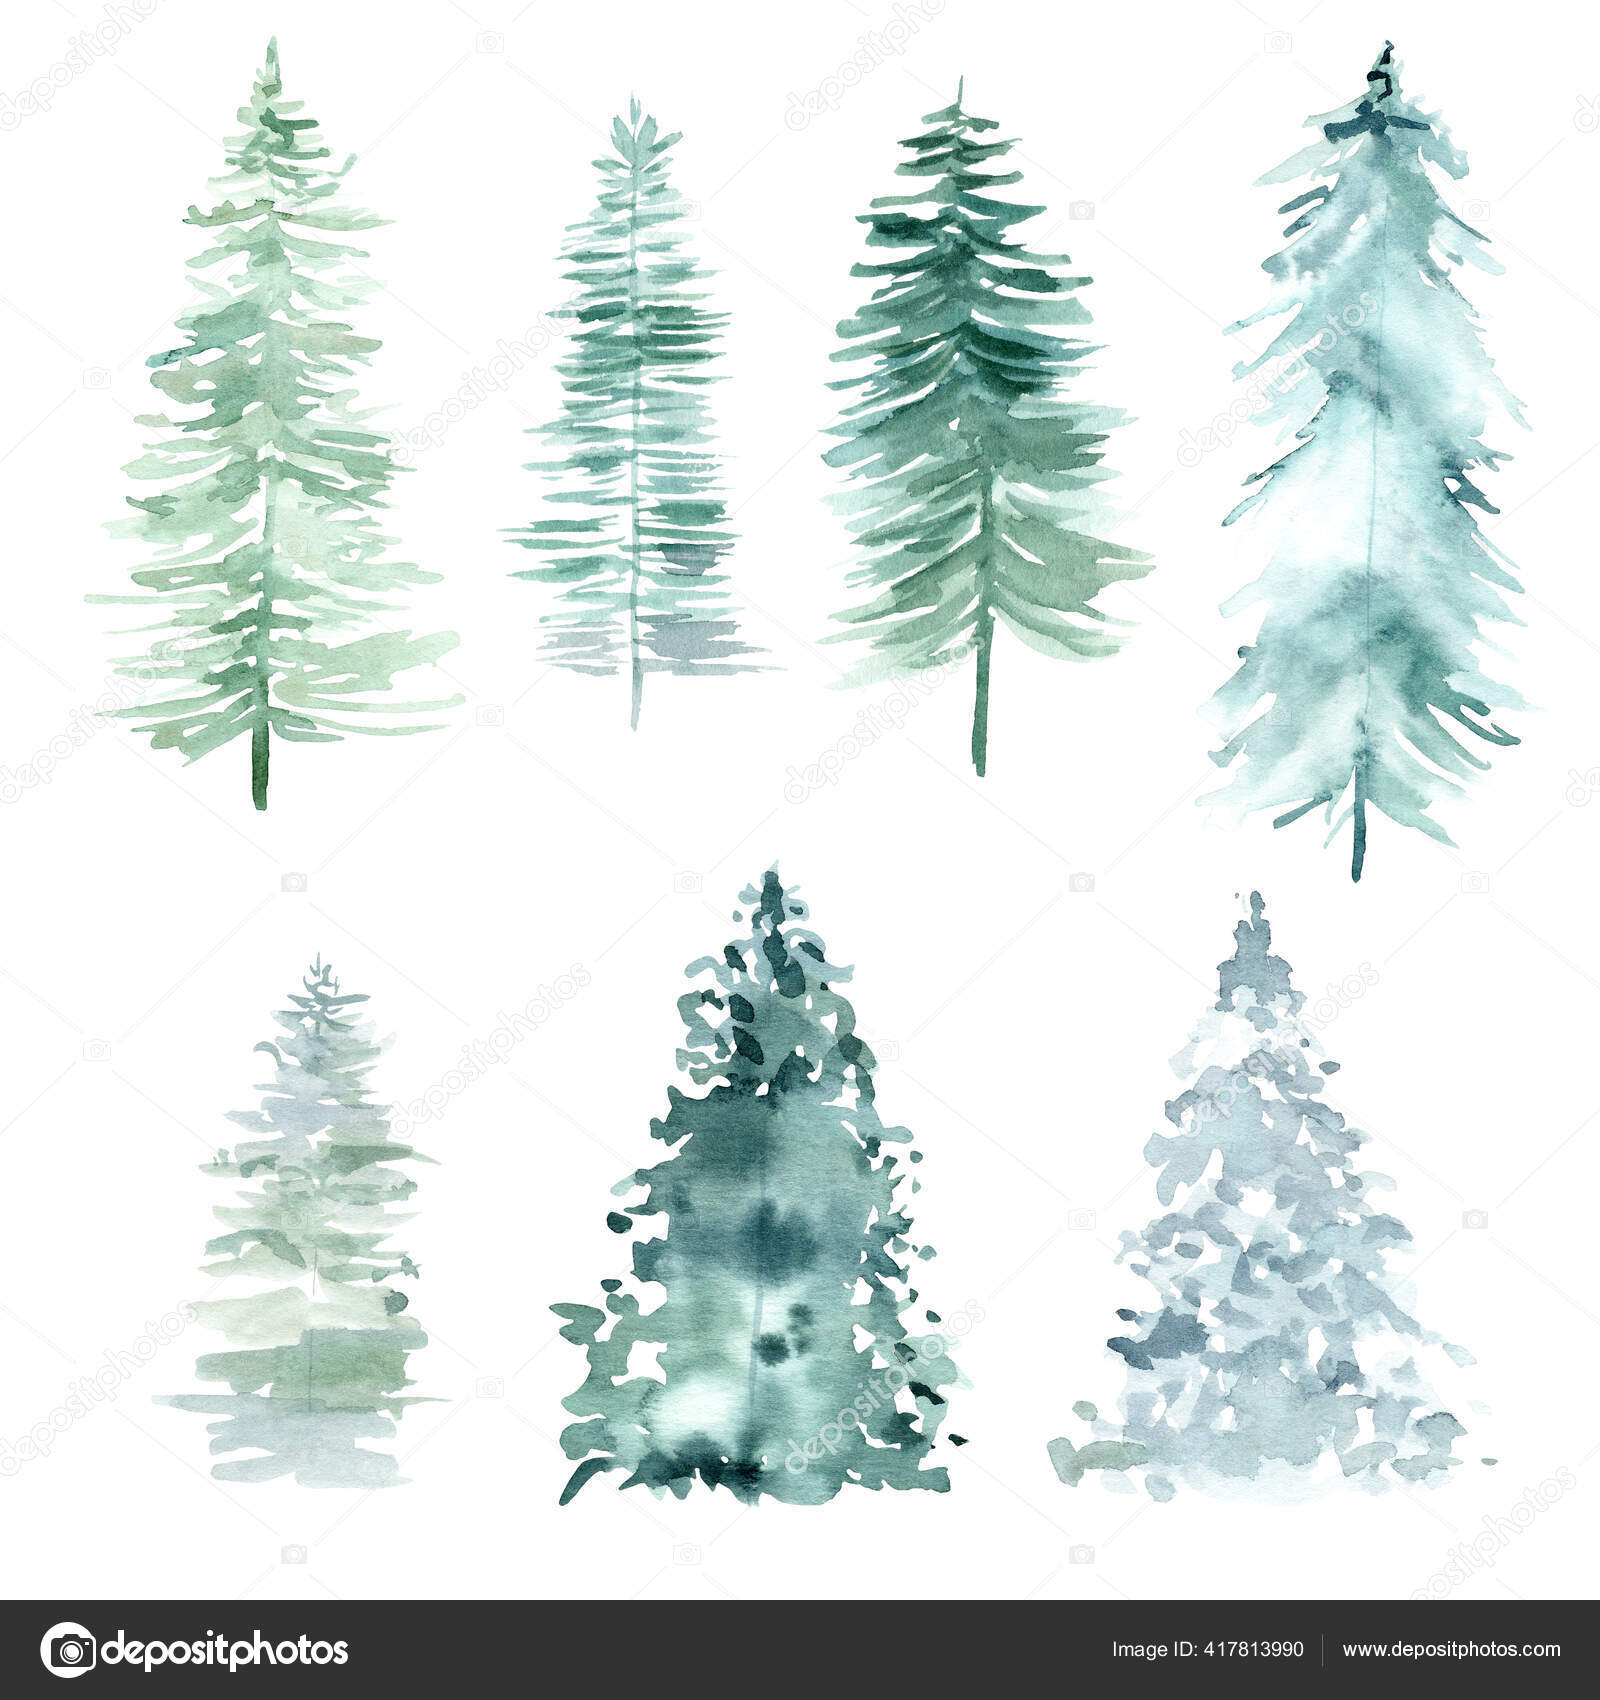 Pictures Of Pine Trees | Pine tree drawing, White pine tree, Free clip art